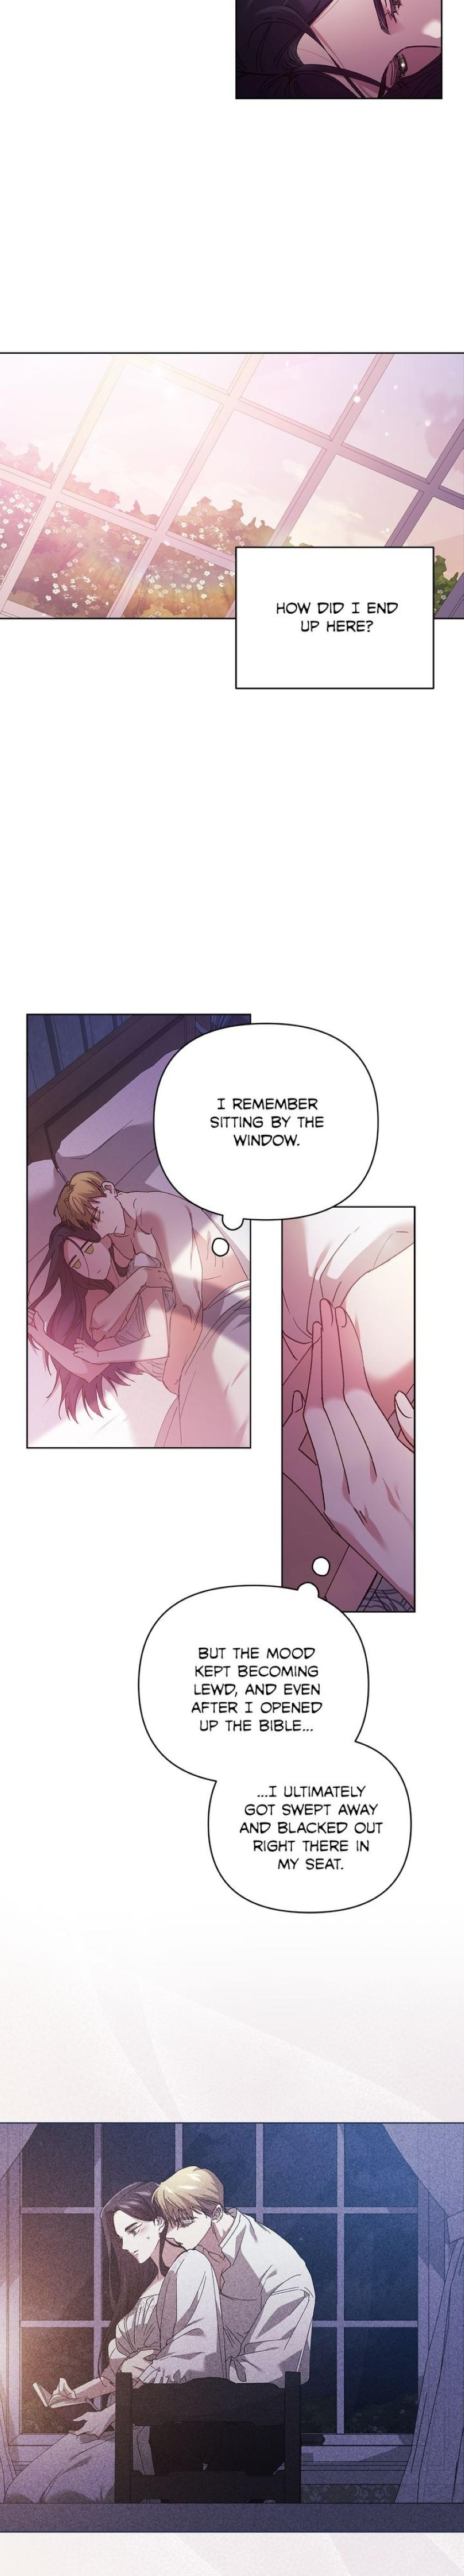 This marriage will fail. The broken Ring this marriage will fail anyway Manga. Манхва broken Ring this marriage. Manhwa broken Ring. This marriage is bound to fail anyway manhwa.